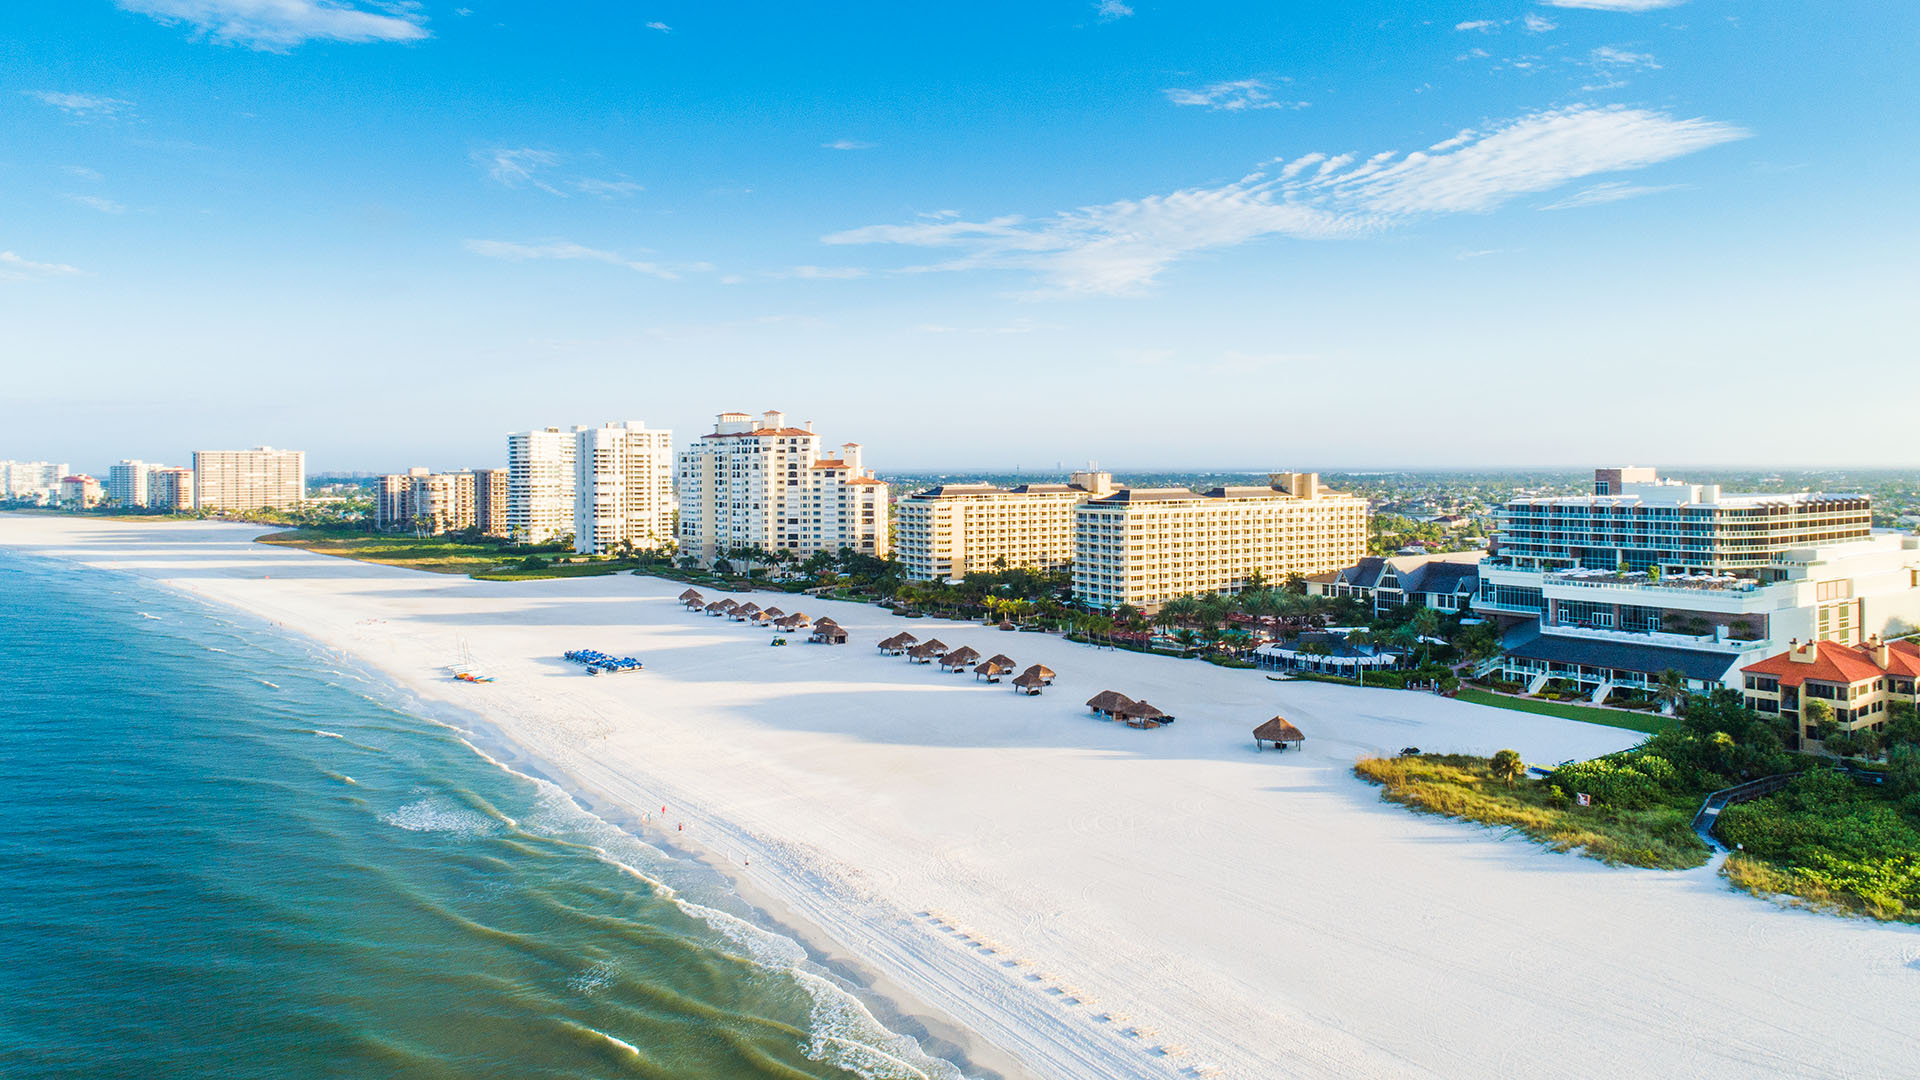 Top 10 Marriott Vacation Club Florida Locations to Visit in 2023